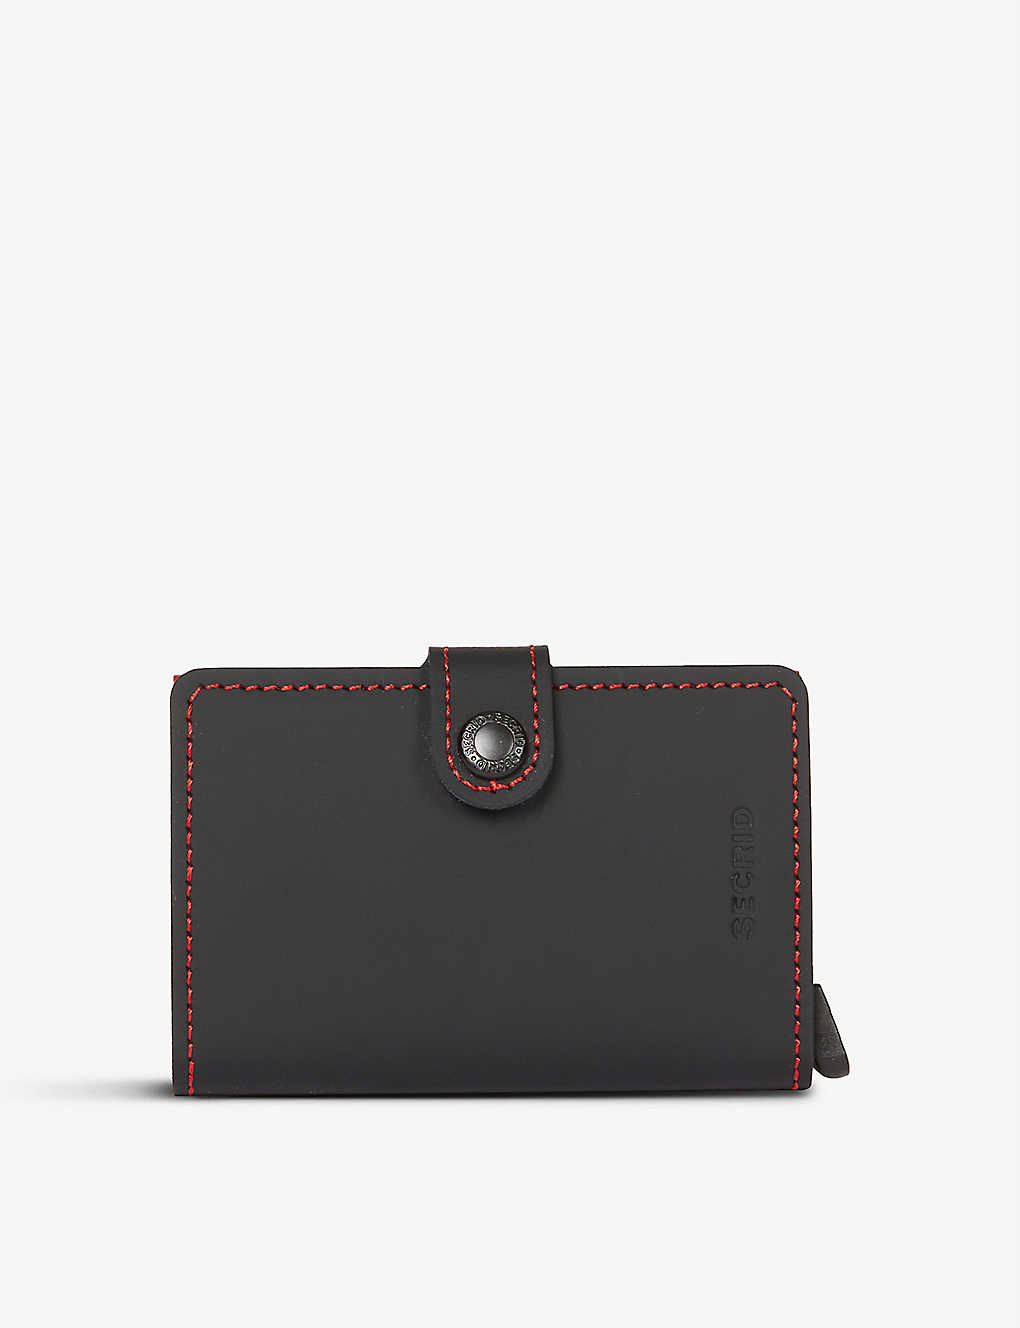 Secrid Miniwallet Leather And Aluminium Wallet In Black/red